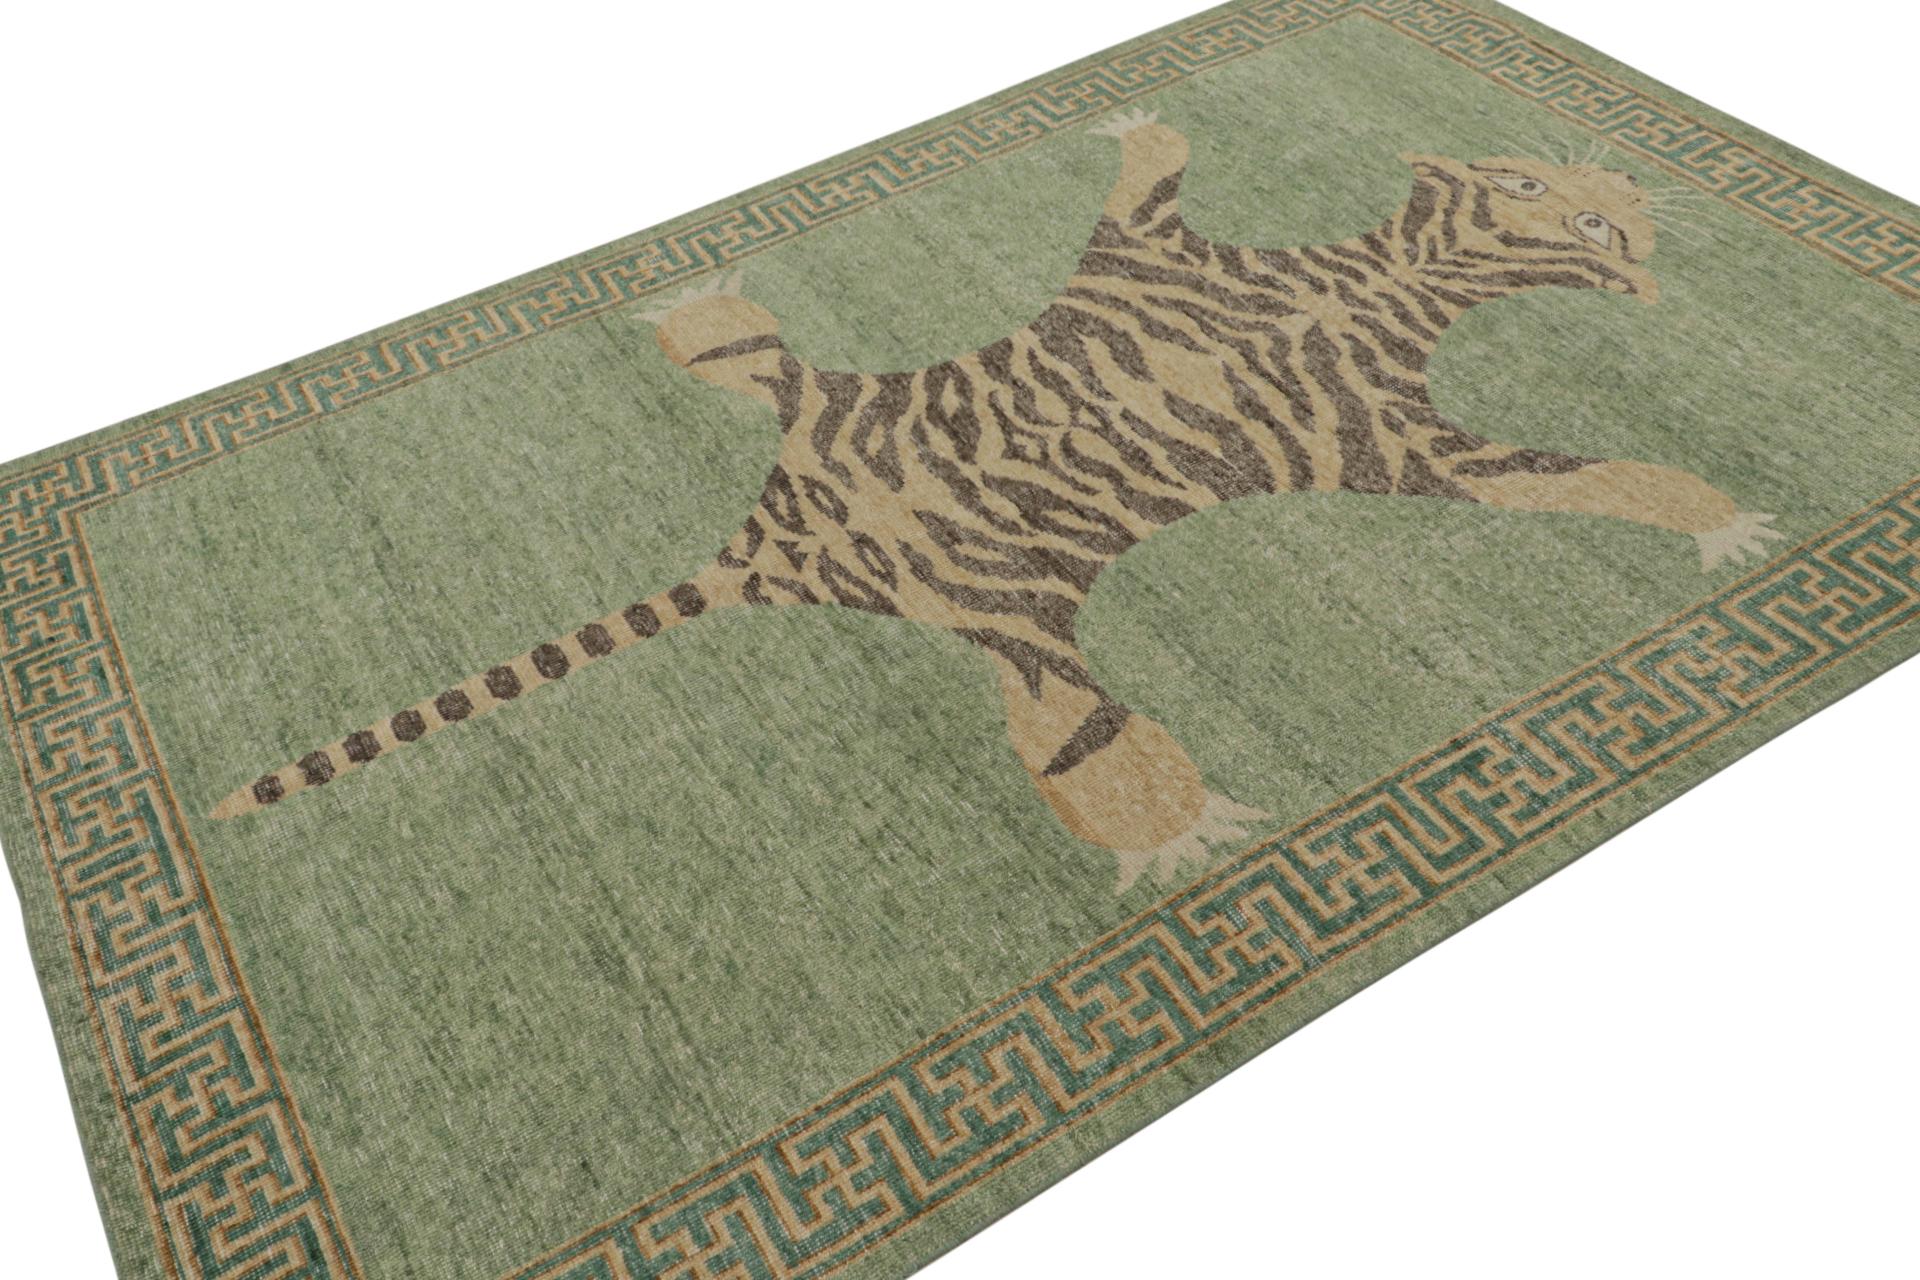 Hand-knotted in wool, this 6x9 modern rug from our Tiger rug line in Homage collection, celebrates one of the most rare and treasured pictorial animal rug styles in history. 

On the Design: 

This geometric pictorial piece joins the latest